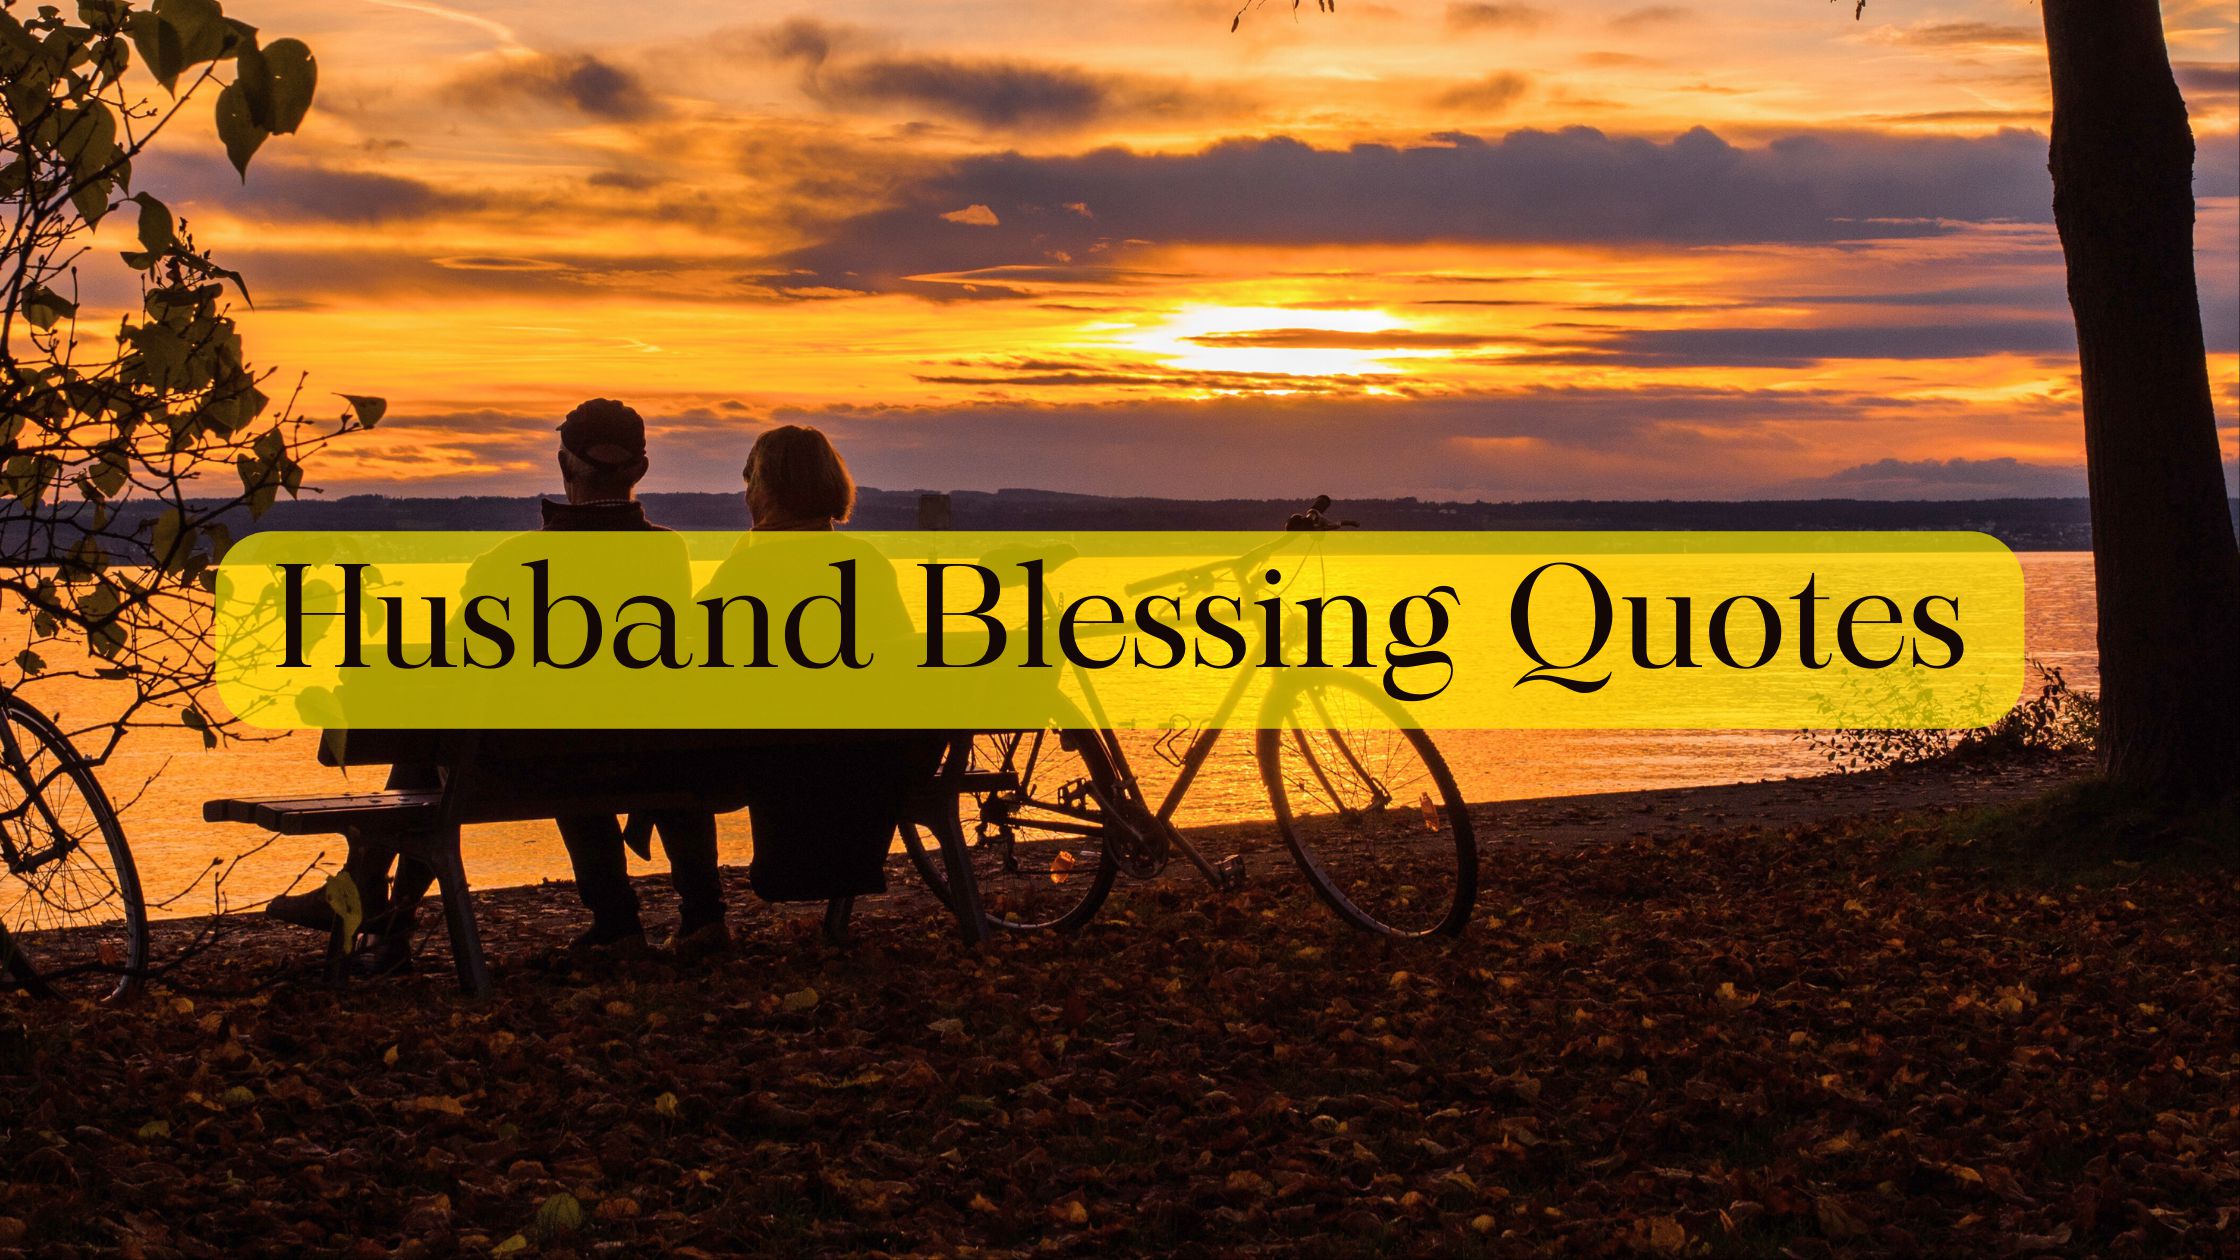 Husband Blessing Quotes